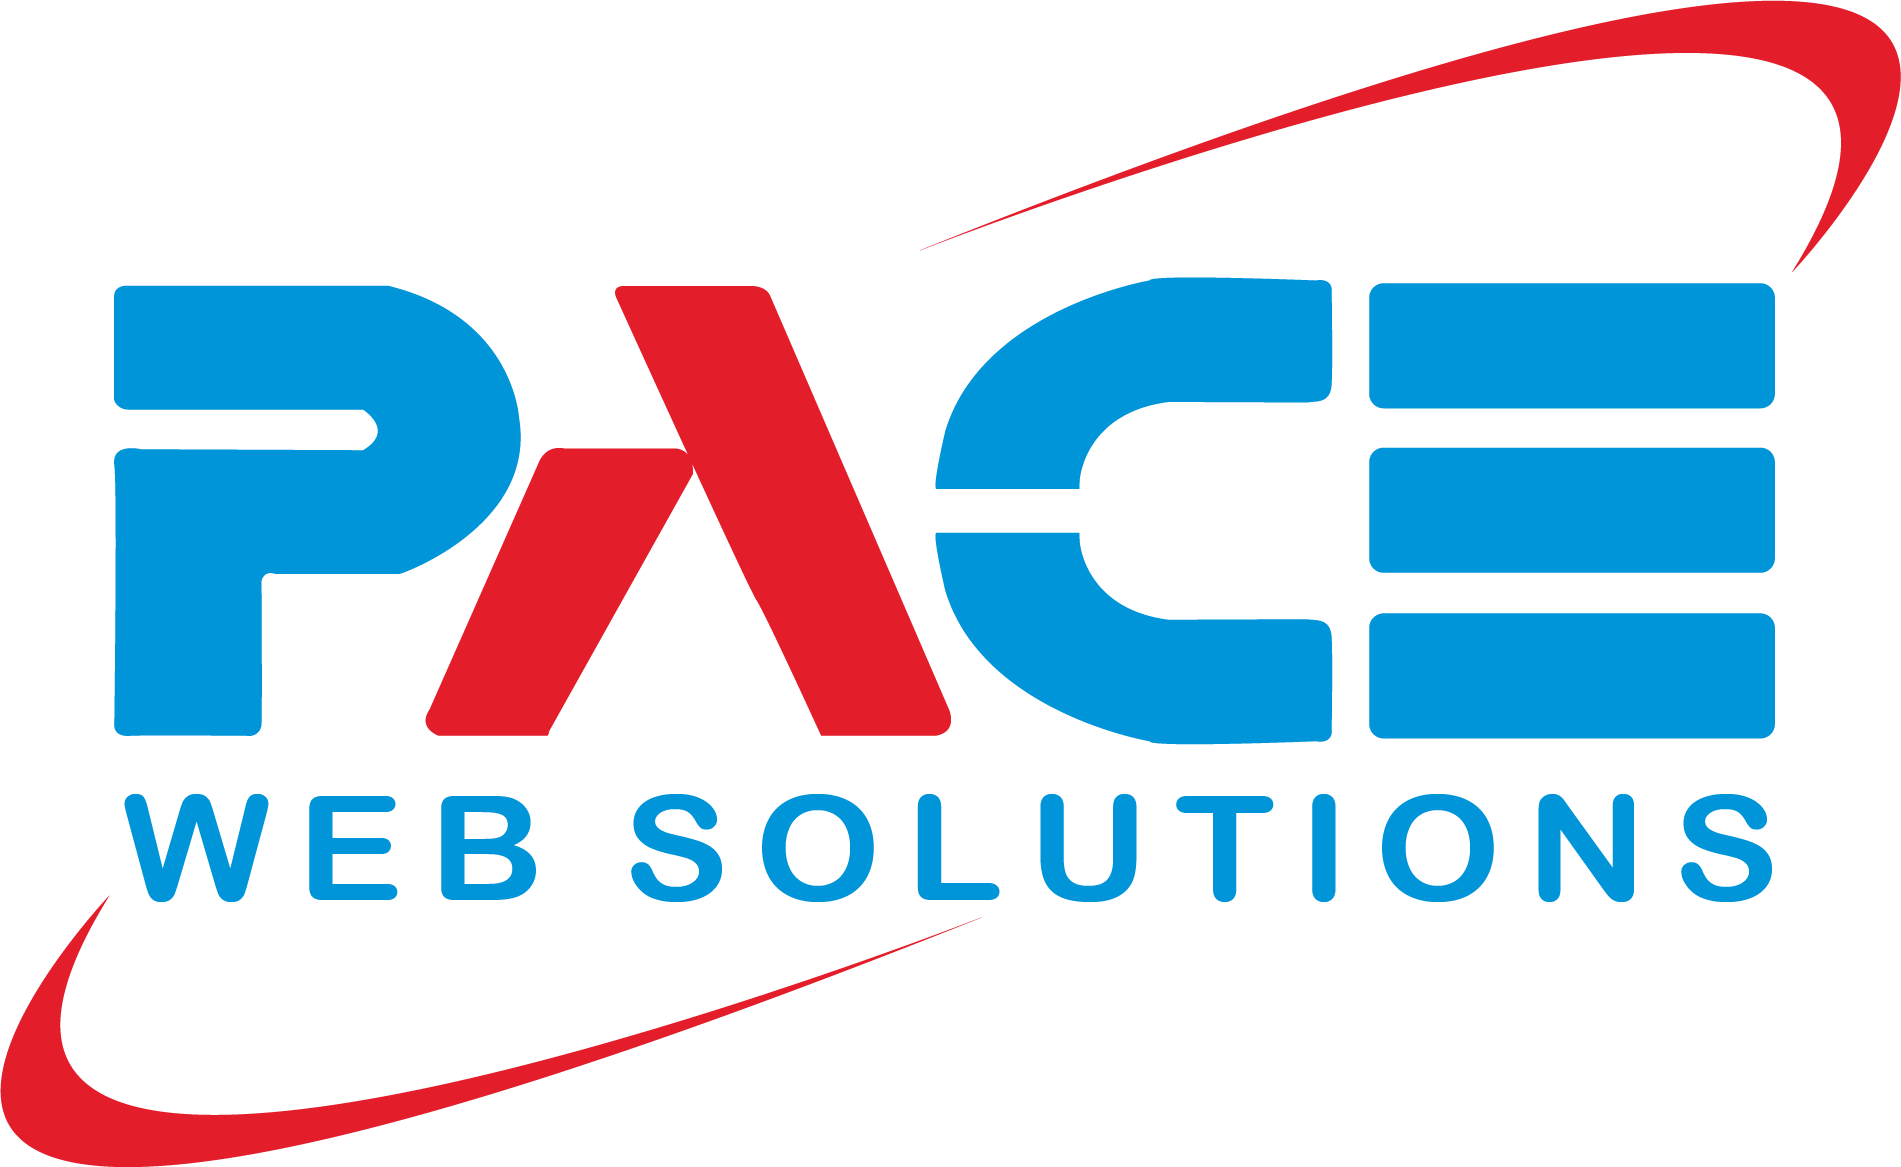 Smart solutions лого. Pace мир. Pace logo. Paces website. Solution start